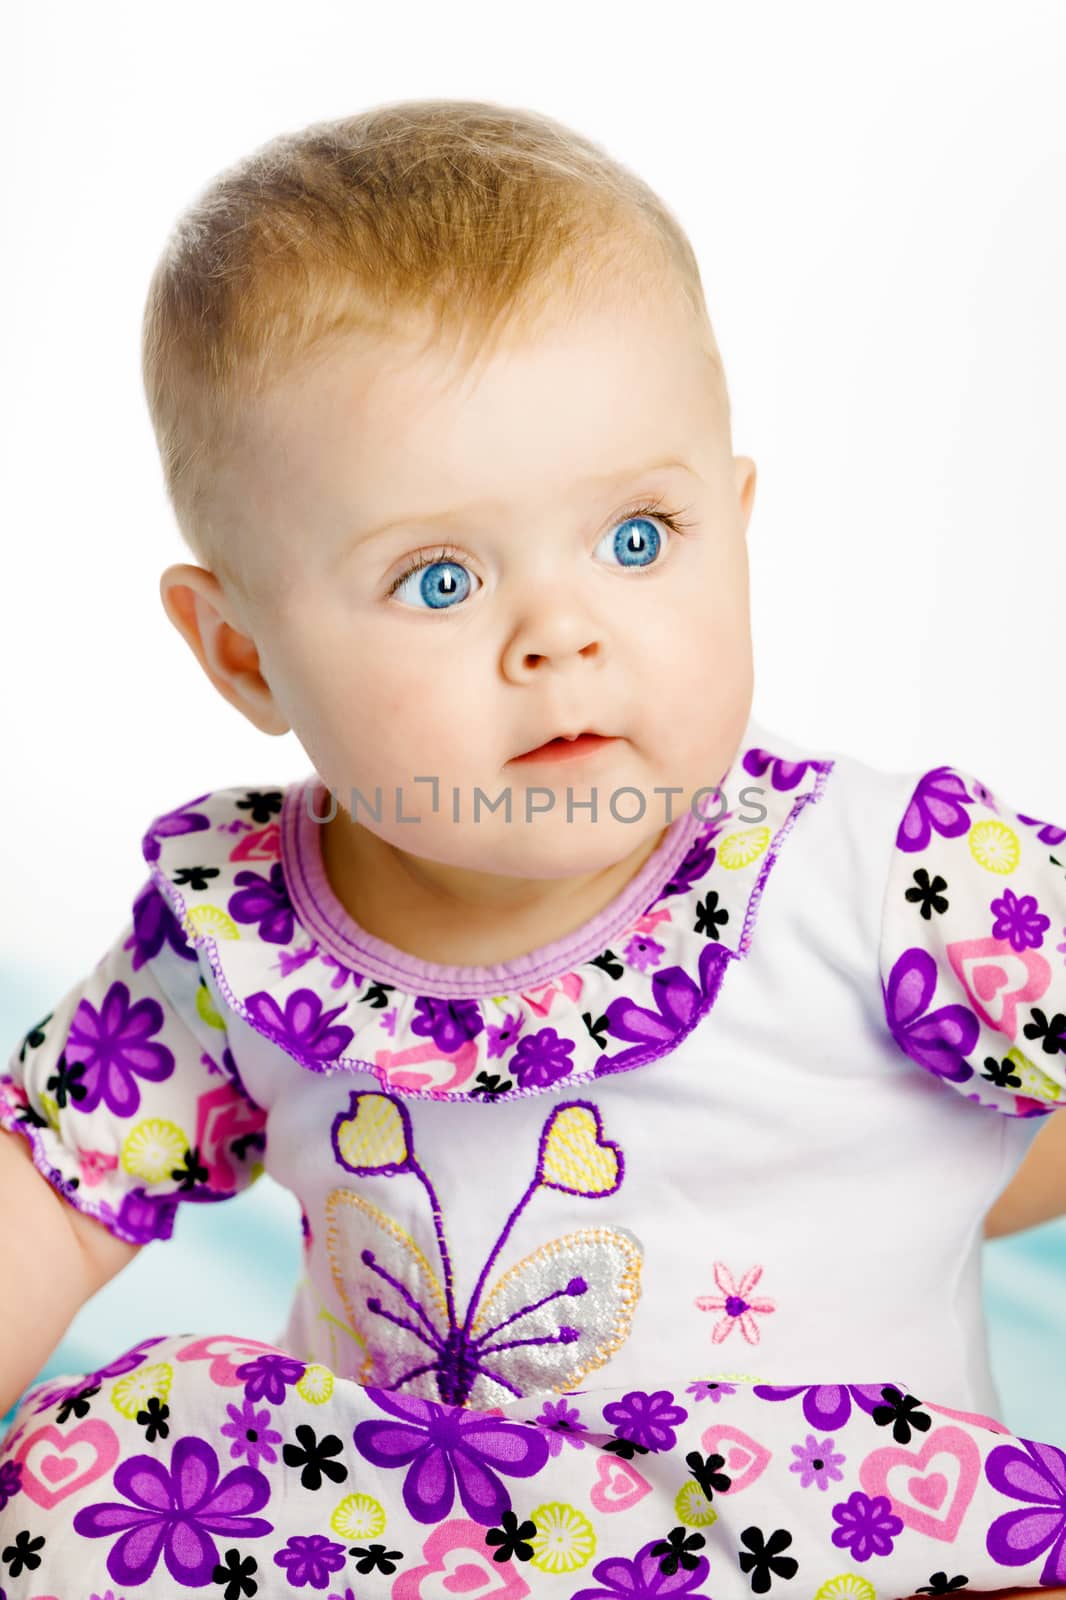 blue-eyed baby girl in a dress. Portrait. Close-up